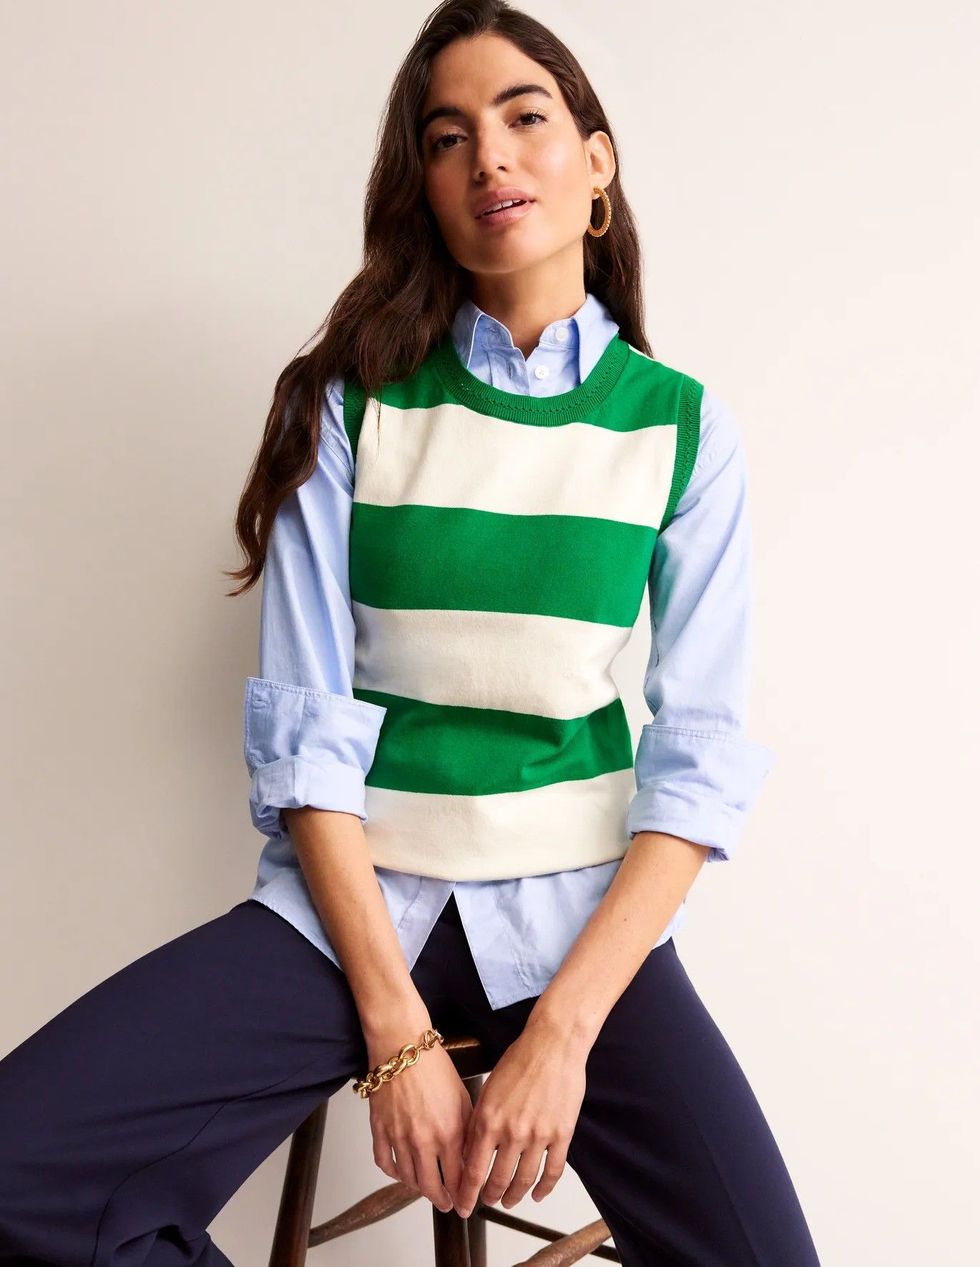 19 Best Sweater Vests For Women: Stylish, Inexpensive Knits